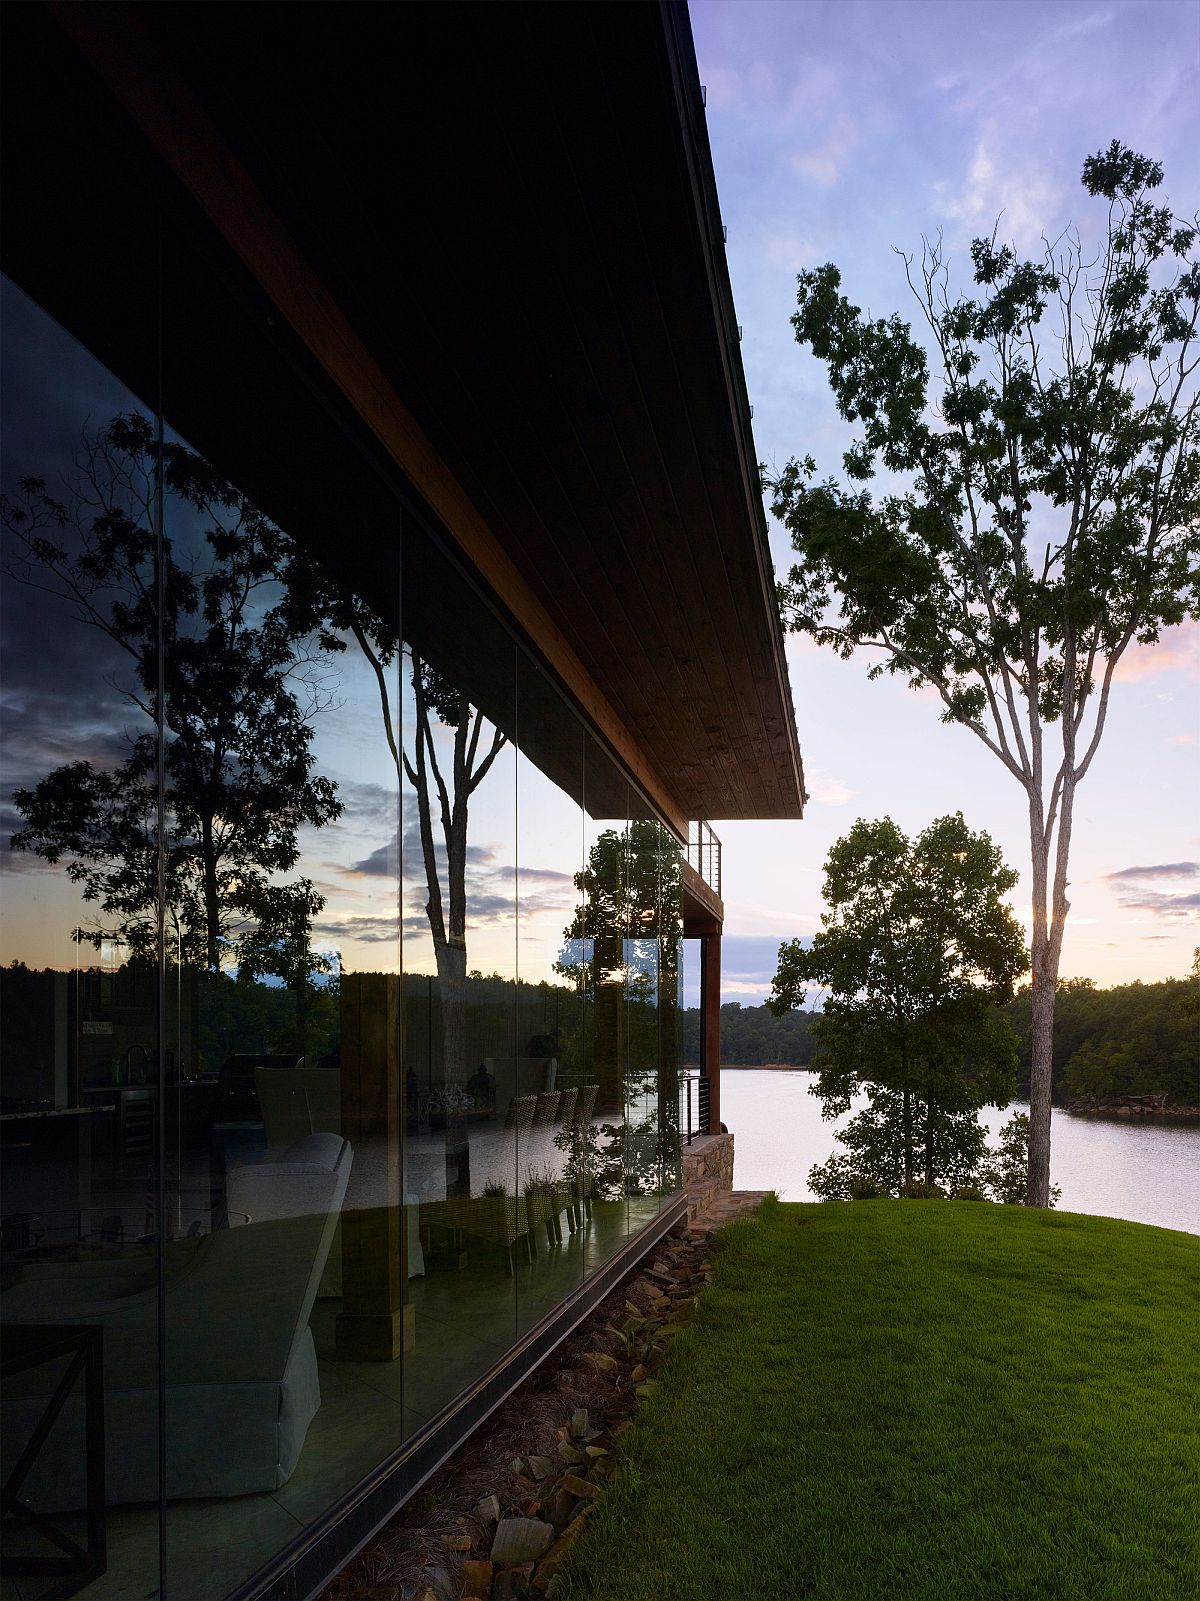 Wall of glass blurs the boundaries between the interior and the landscape outside